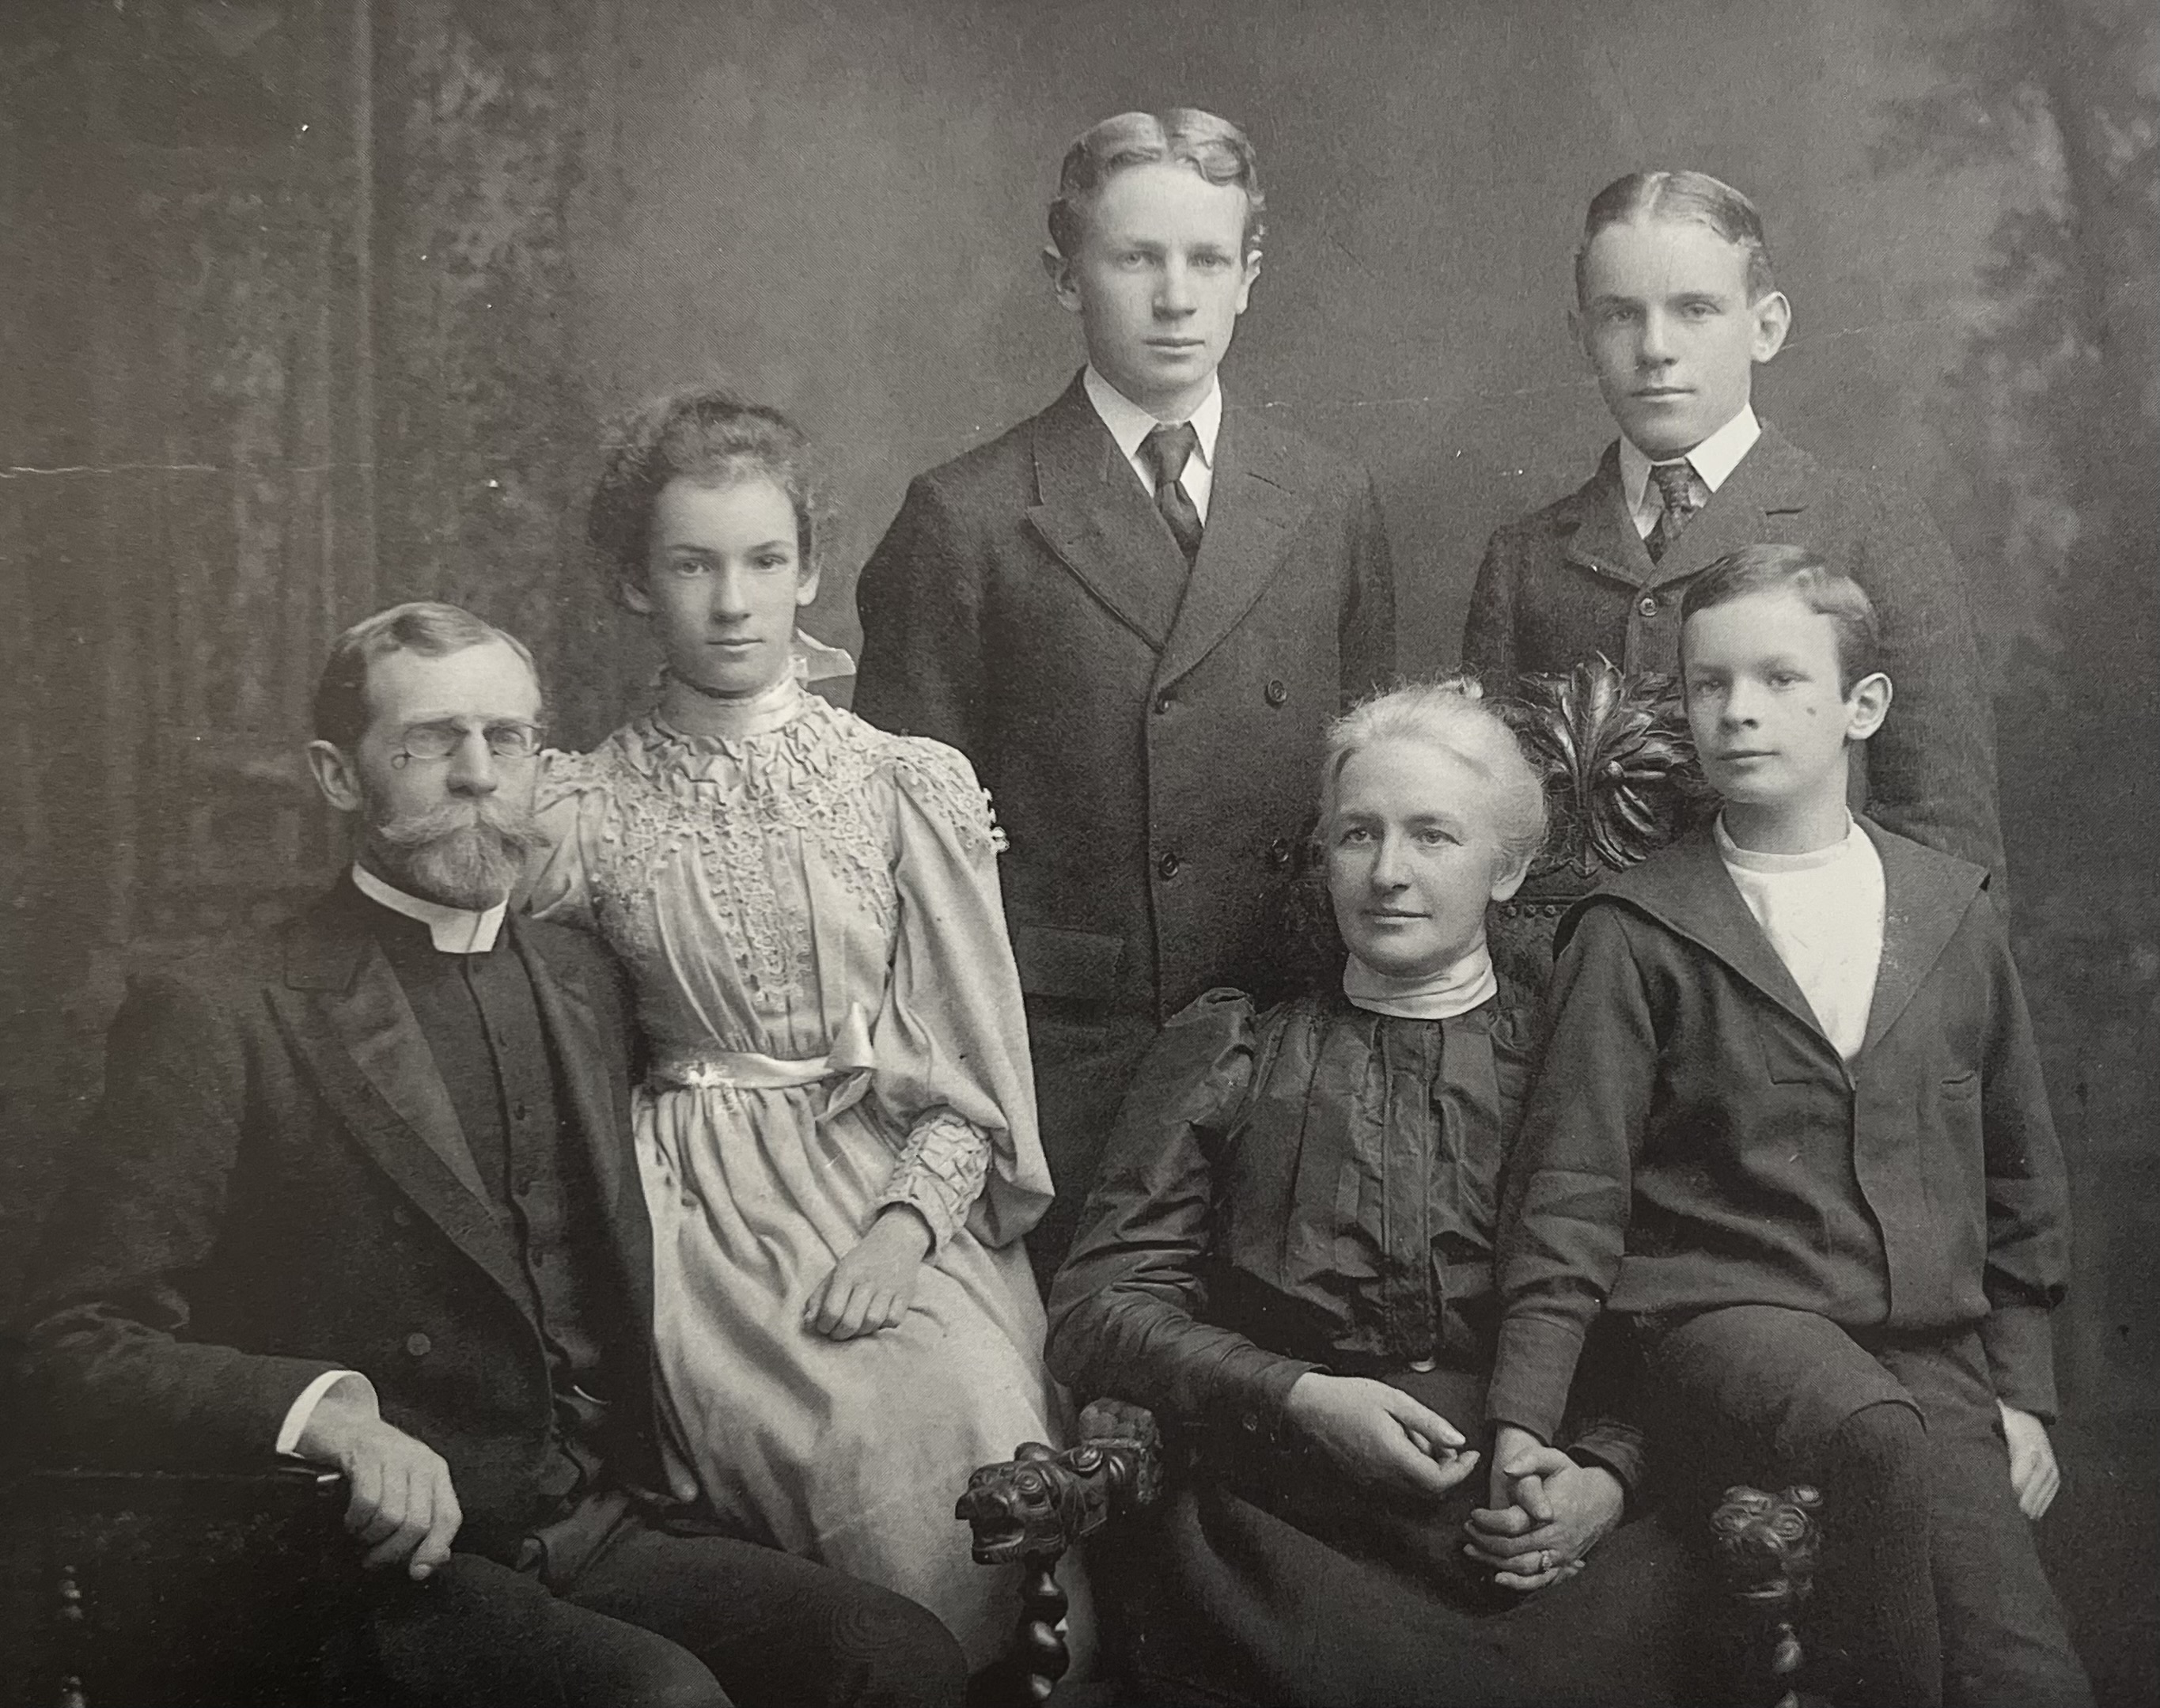 A black-and-white family portrait from the 1800s features six light-skinned individuals: two parents and their three sons and one daughter, who are pre-teen or teen age. Everyone wears dark dress except for the daughter, who is in a light, lace dress with a high collar. They all stare at the camera.